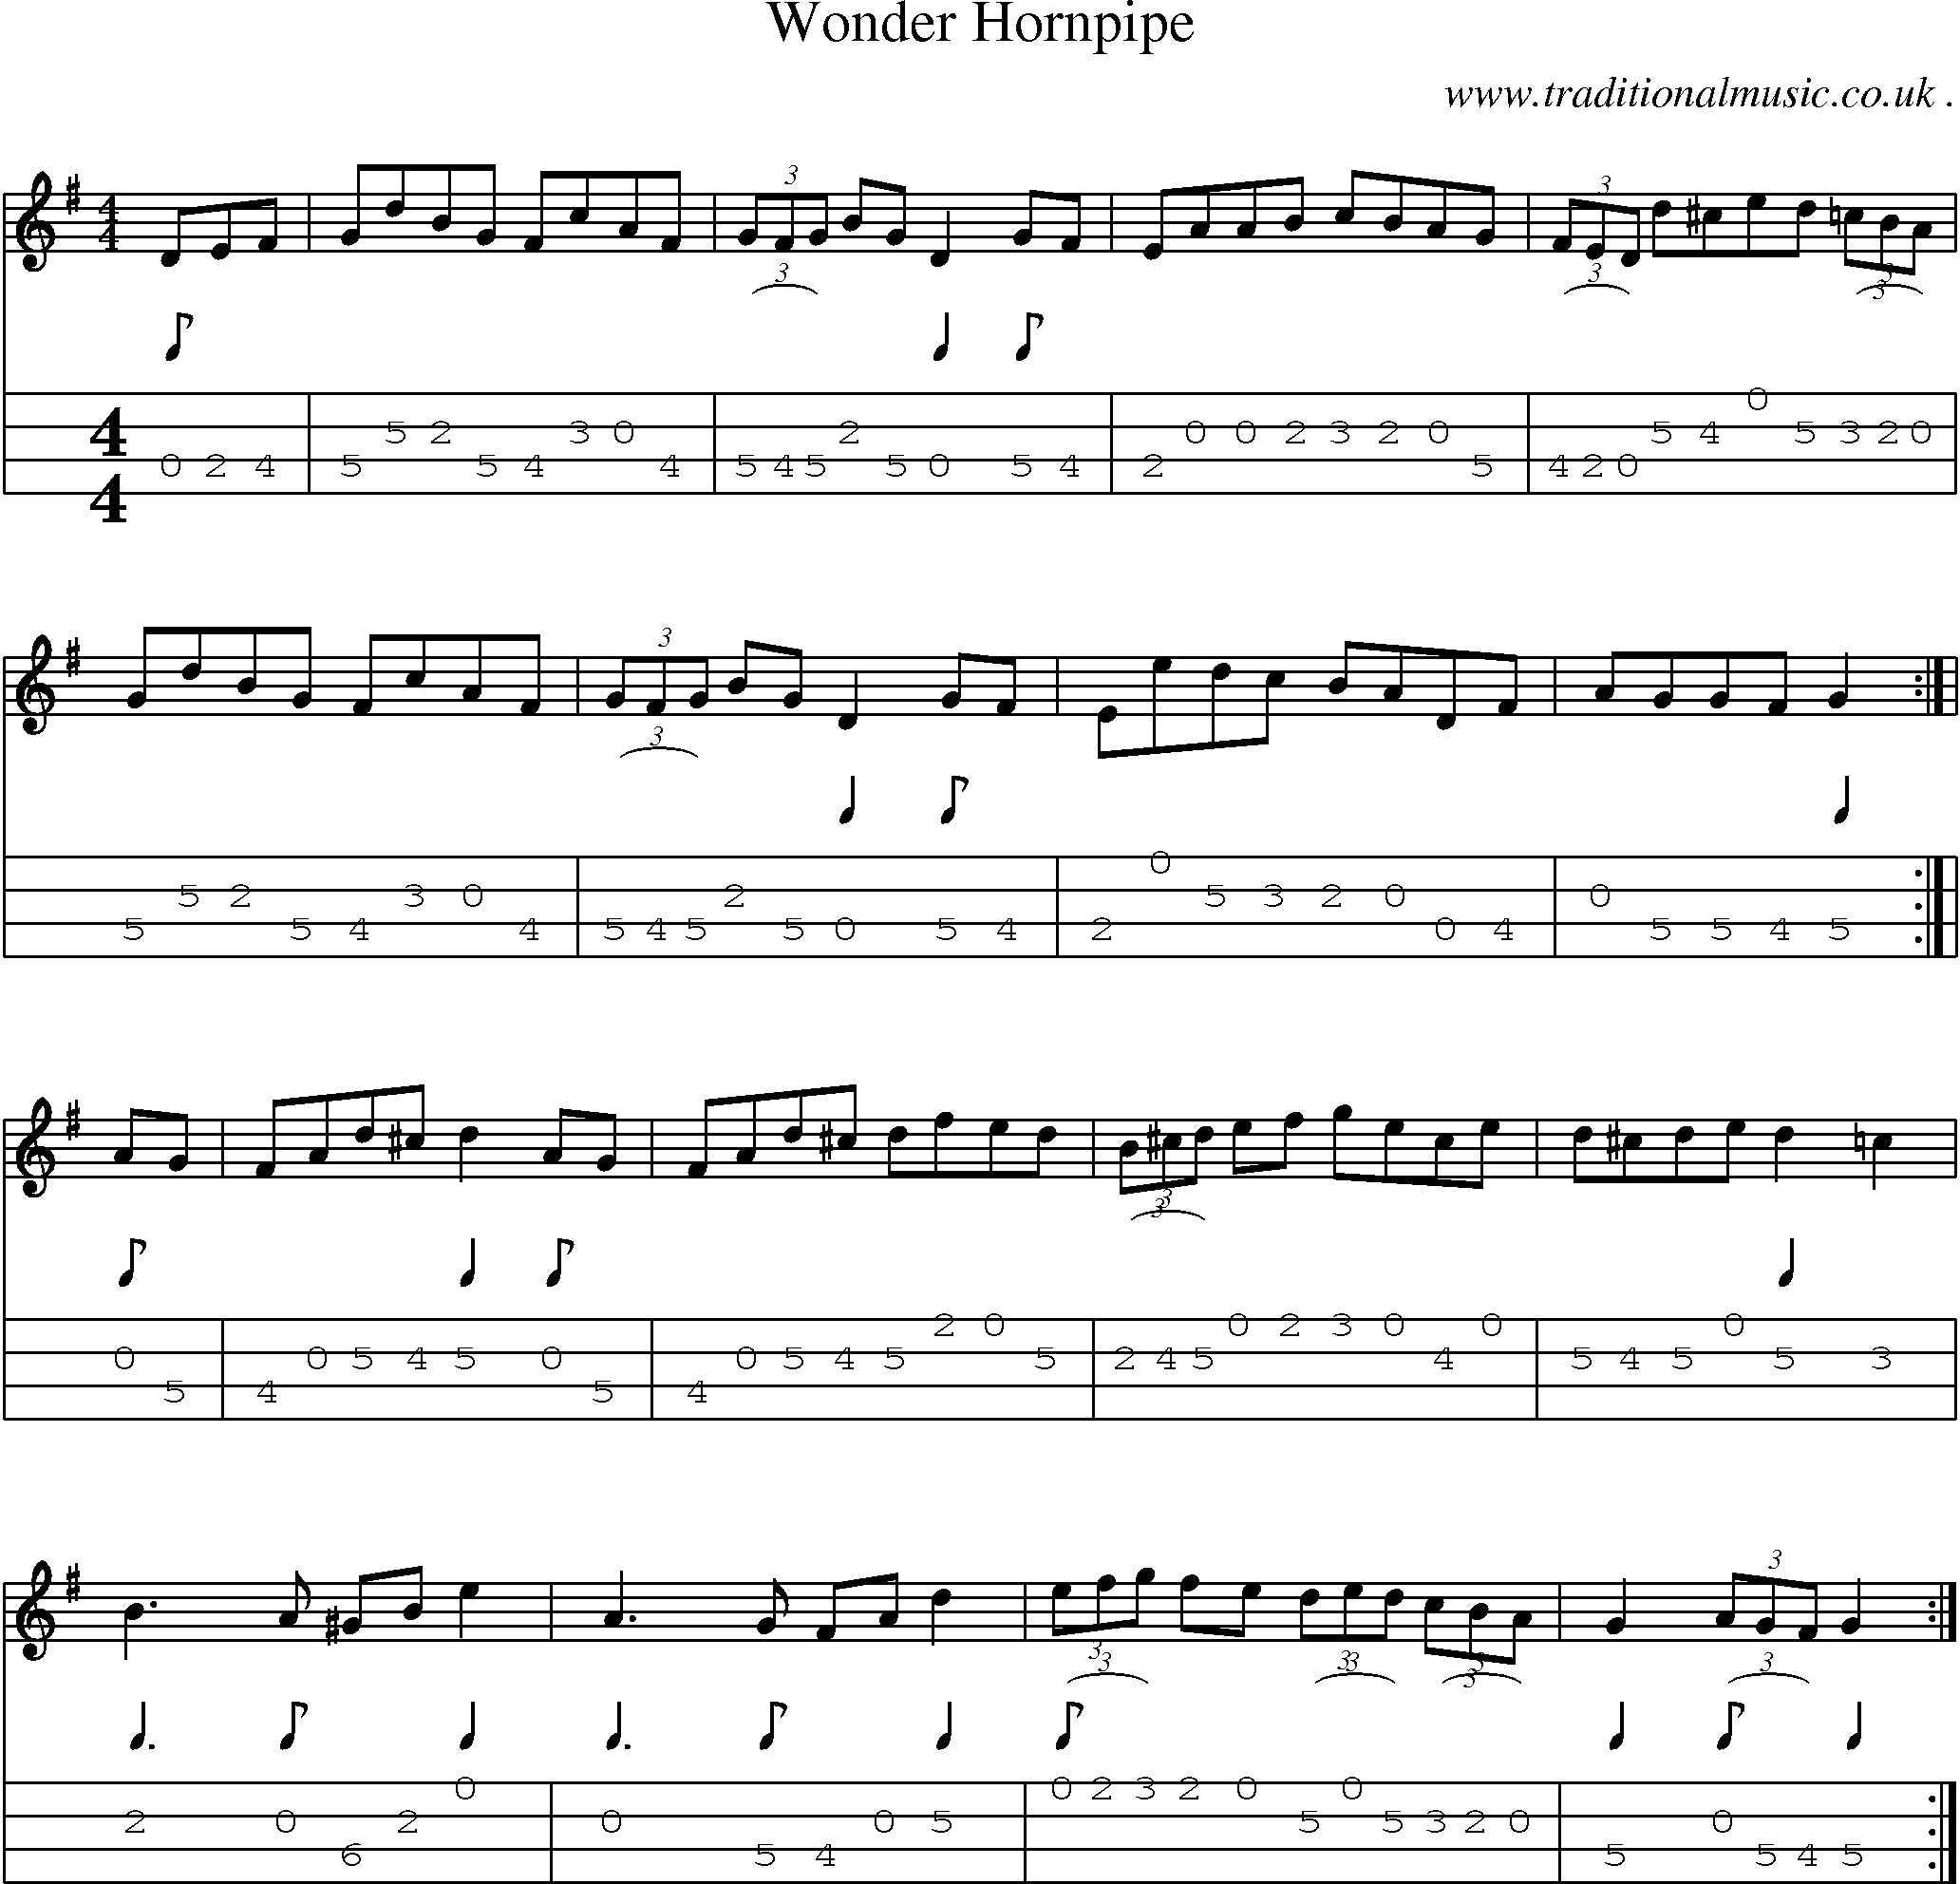 Sheet-Music and Mandolin Tabs for Wonder Hornpipe